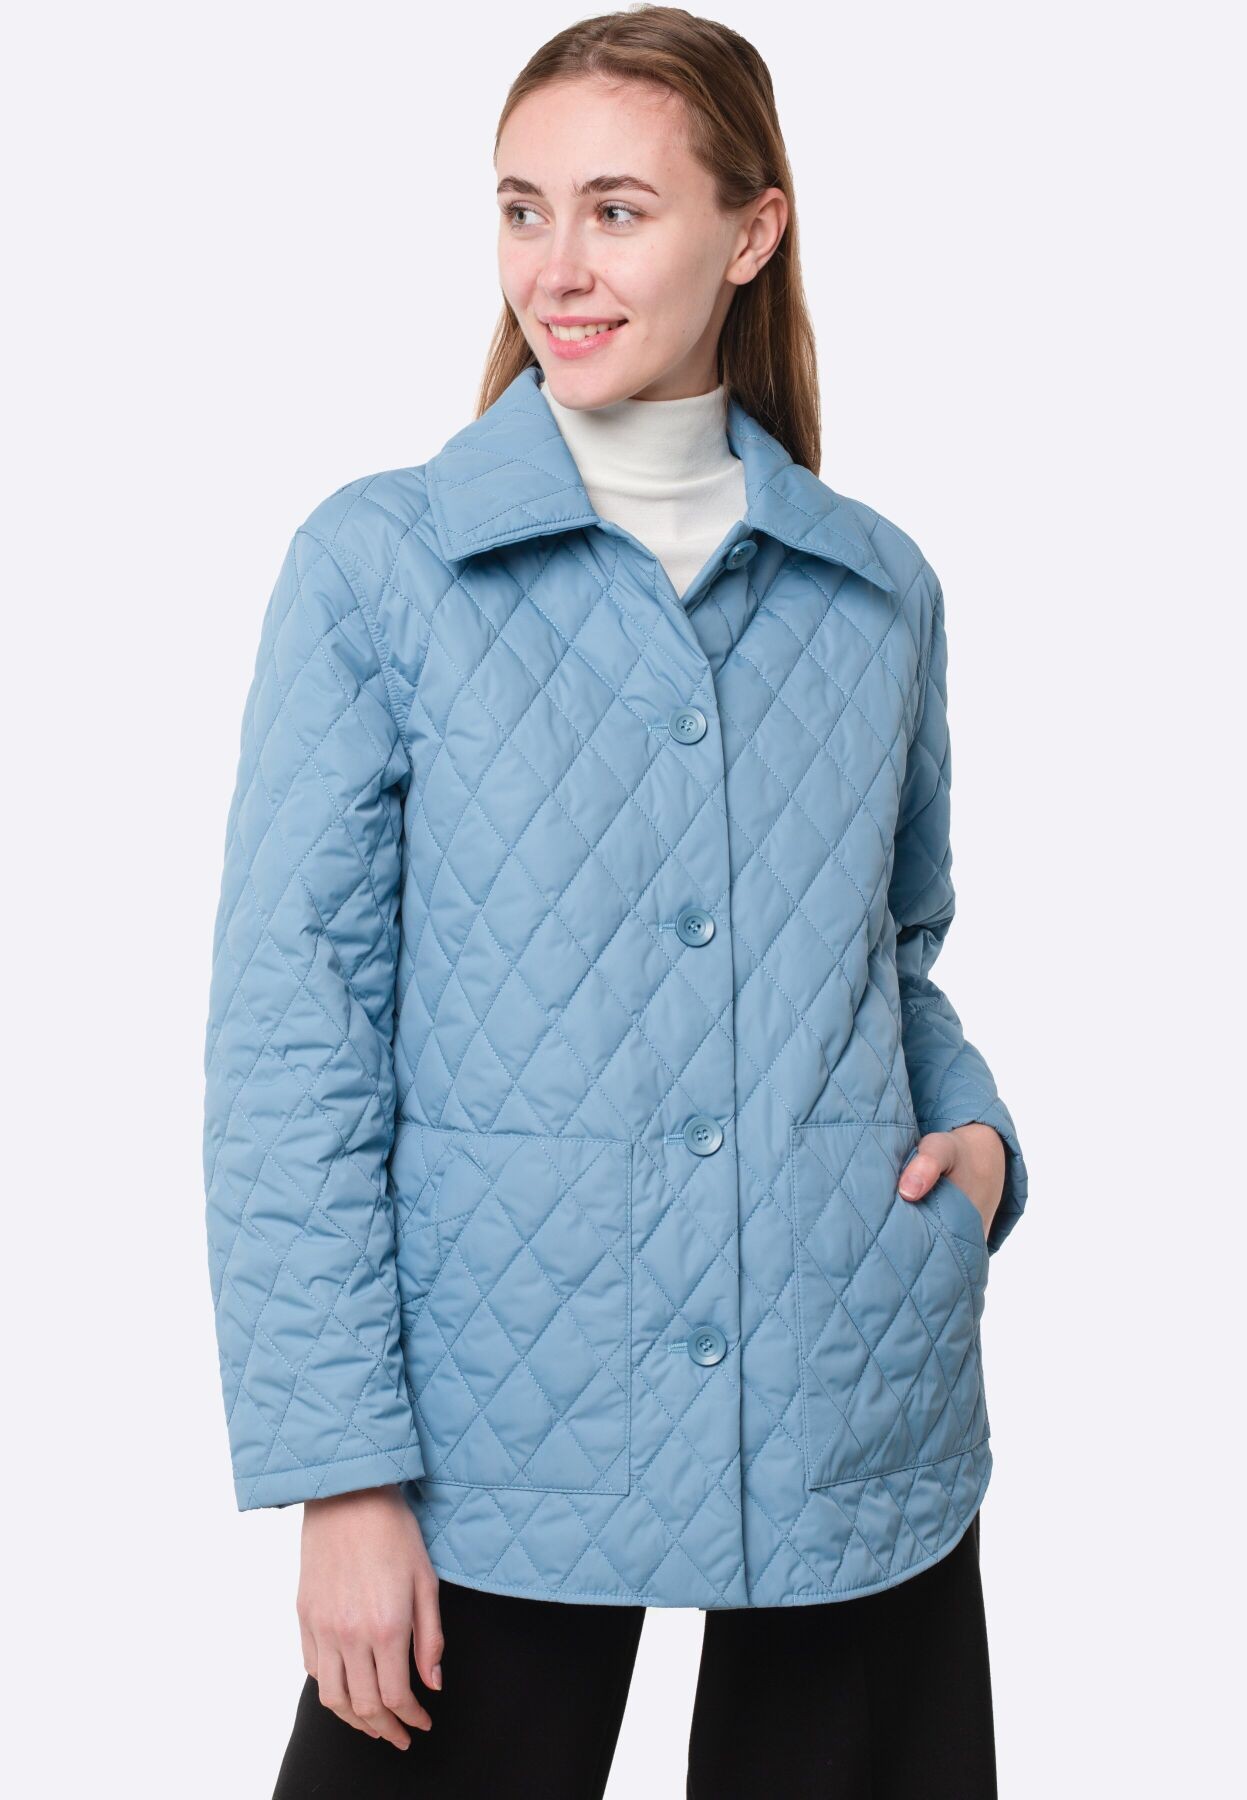 Long quilted jacket of blue color 4417